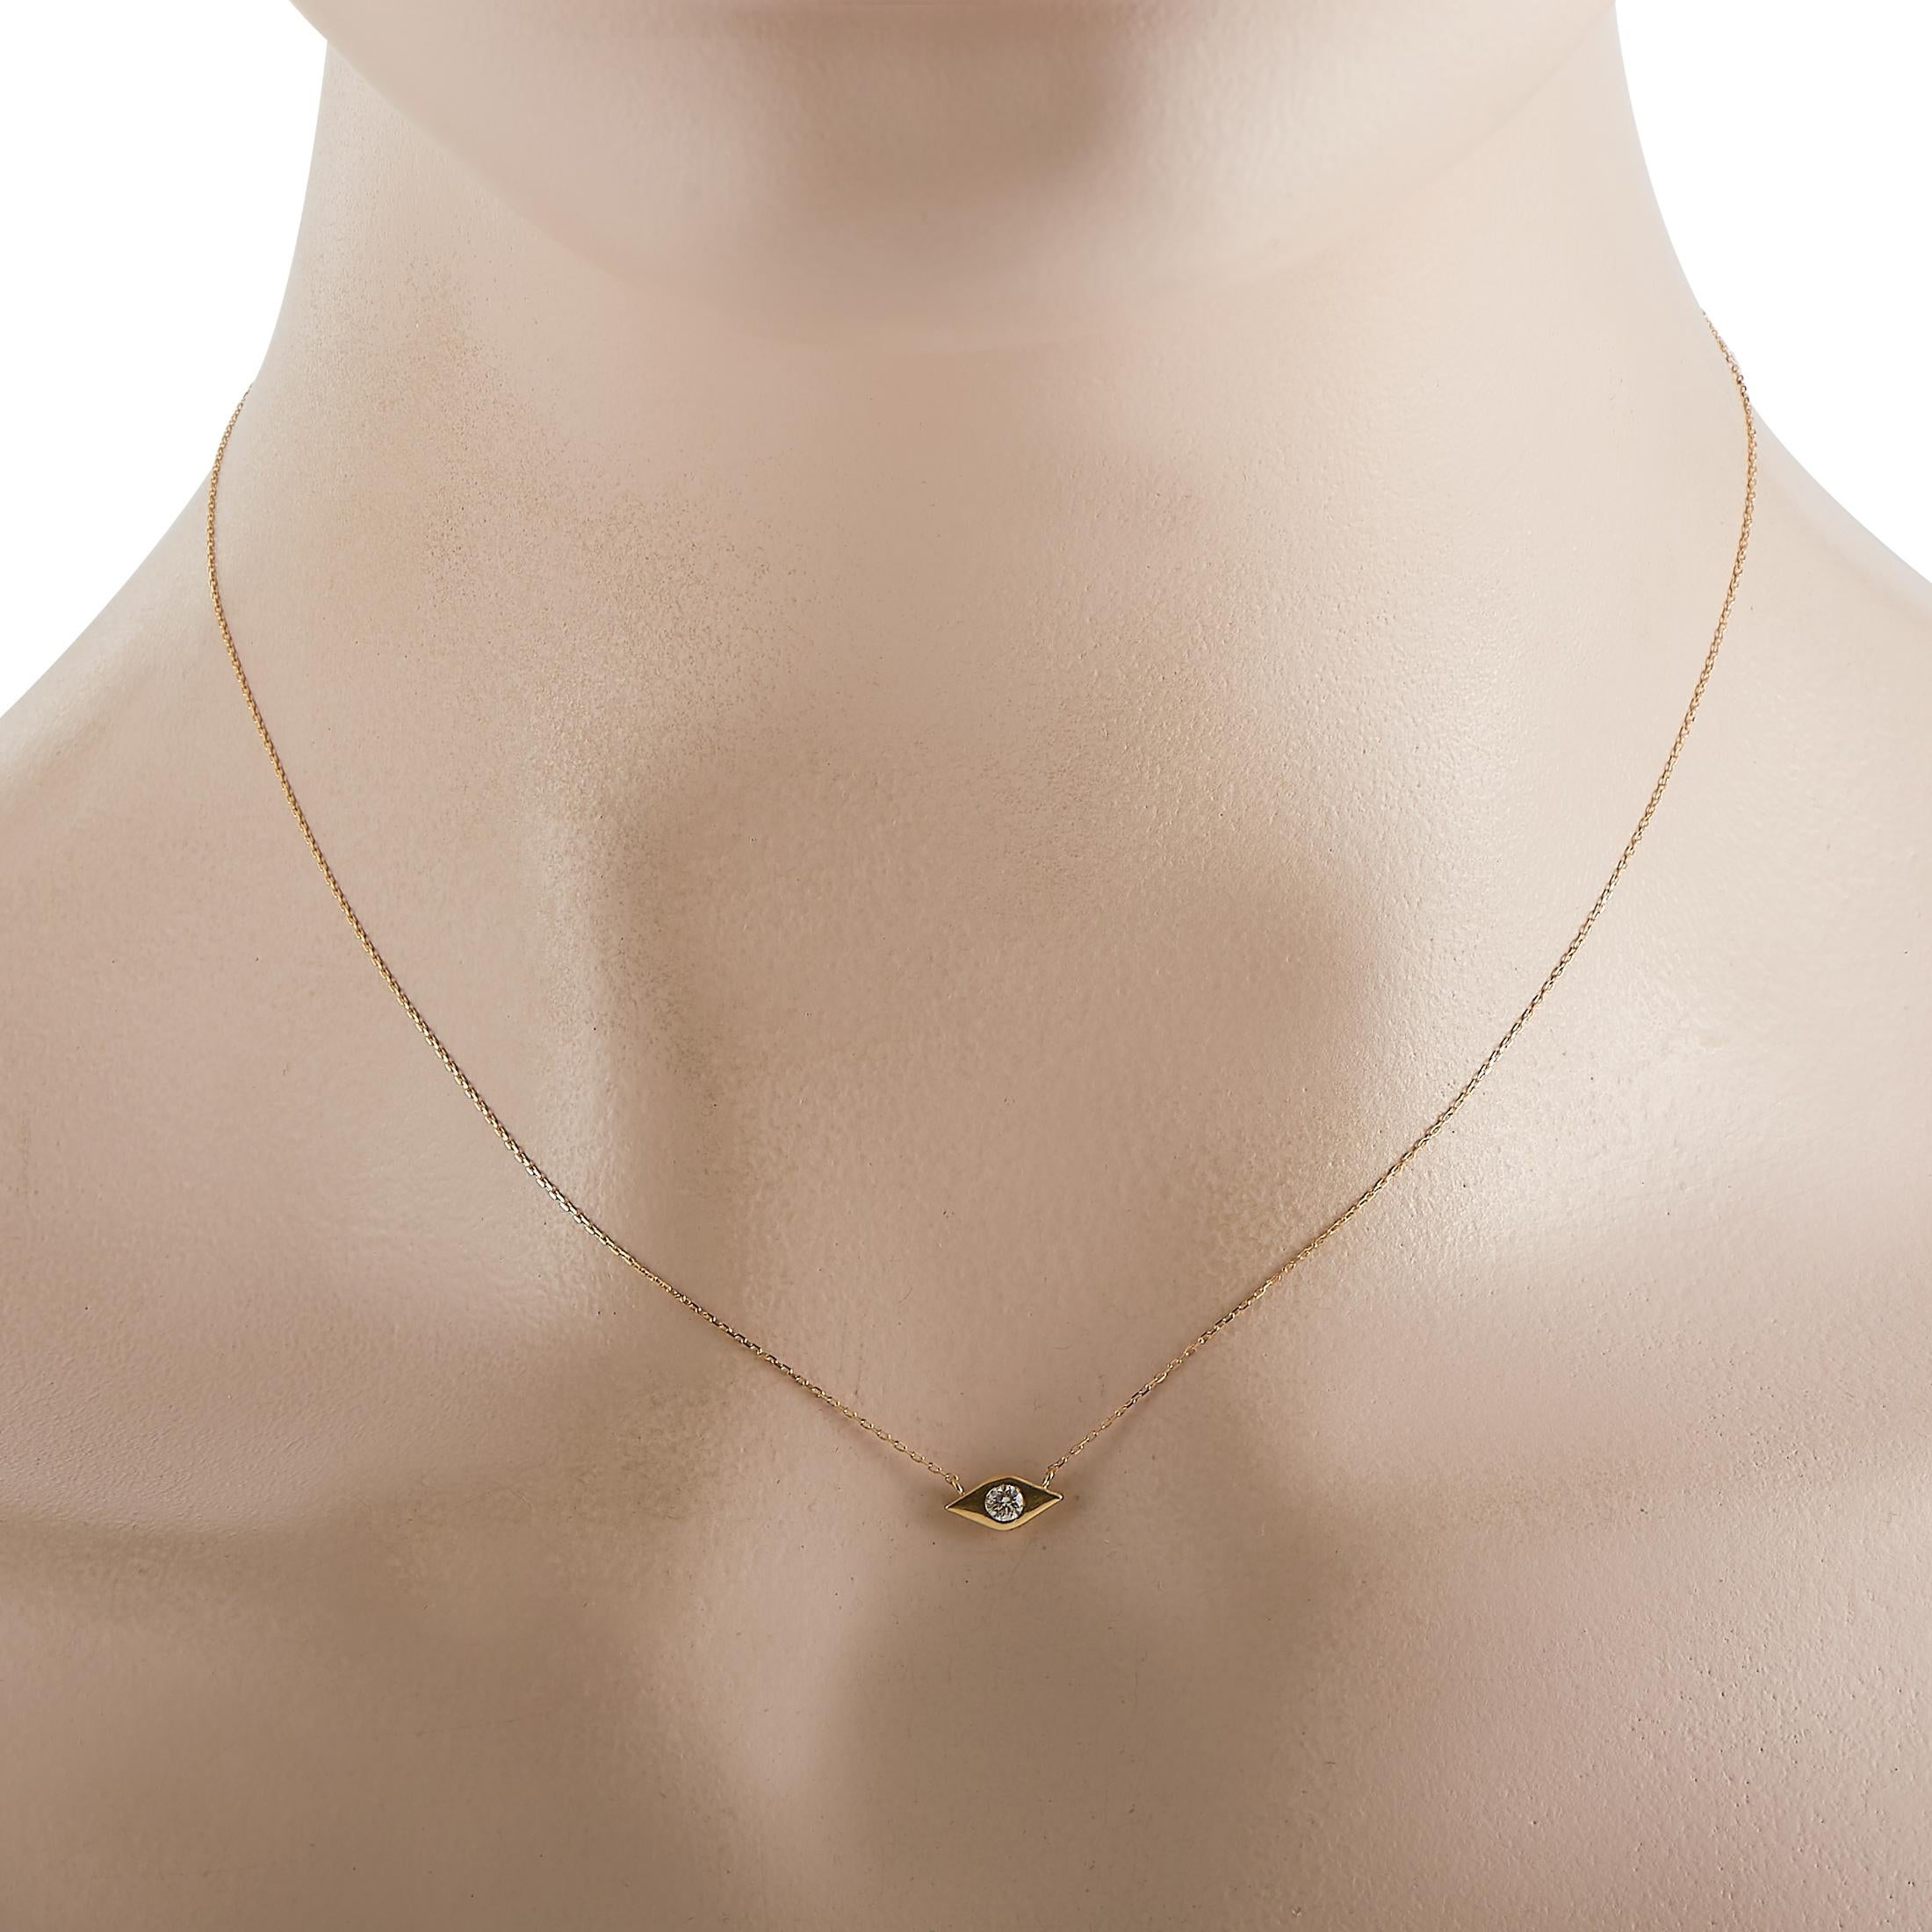 An eye-shaped pendant measuring .15” long and 0.25” wide makes a statement on this 18K Yellow Gold pendant necklace. Suspended at the center of a 15” chain, it features a glittering 0.08 carat round cut diamond at the center for a touch of added